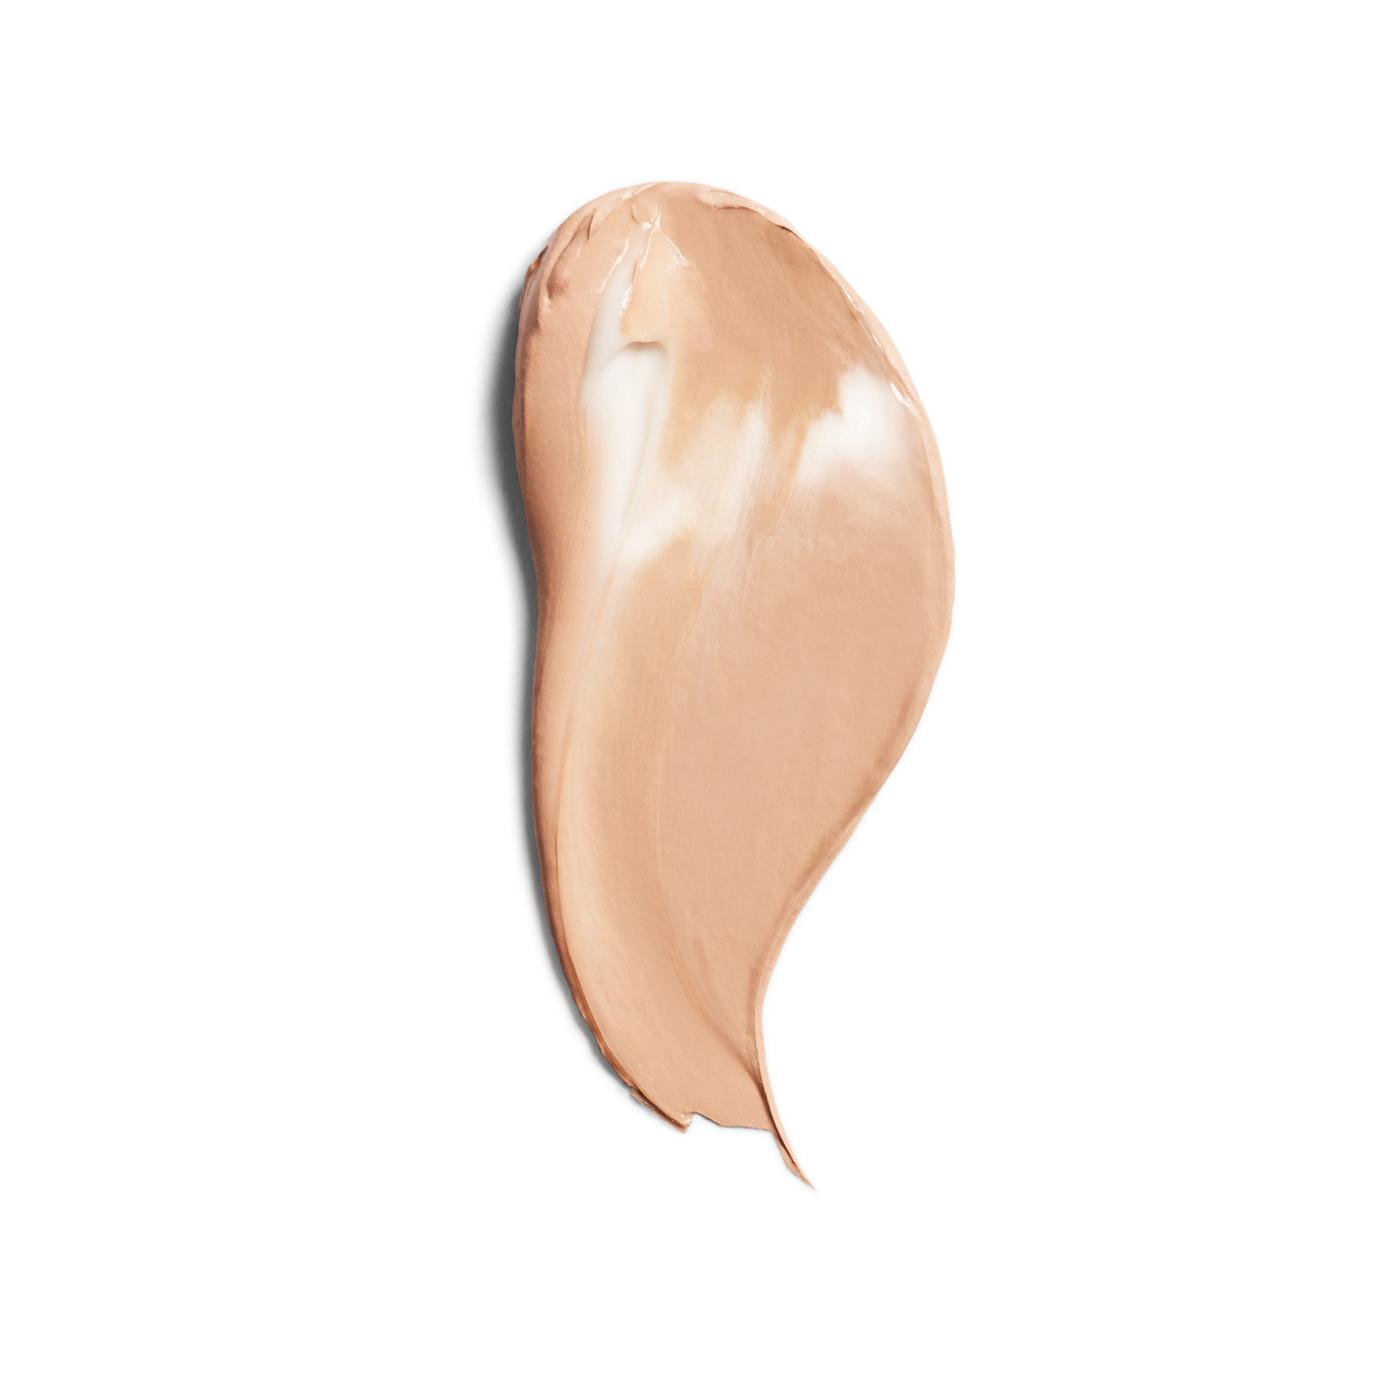 Covergirl Simply Ageless Wrinkle Defying Foundation 240 Natural Beige; image 3 of 8